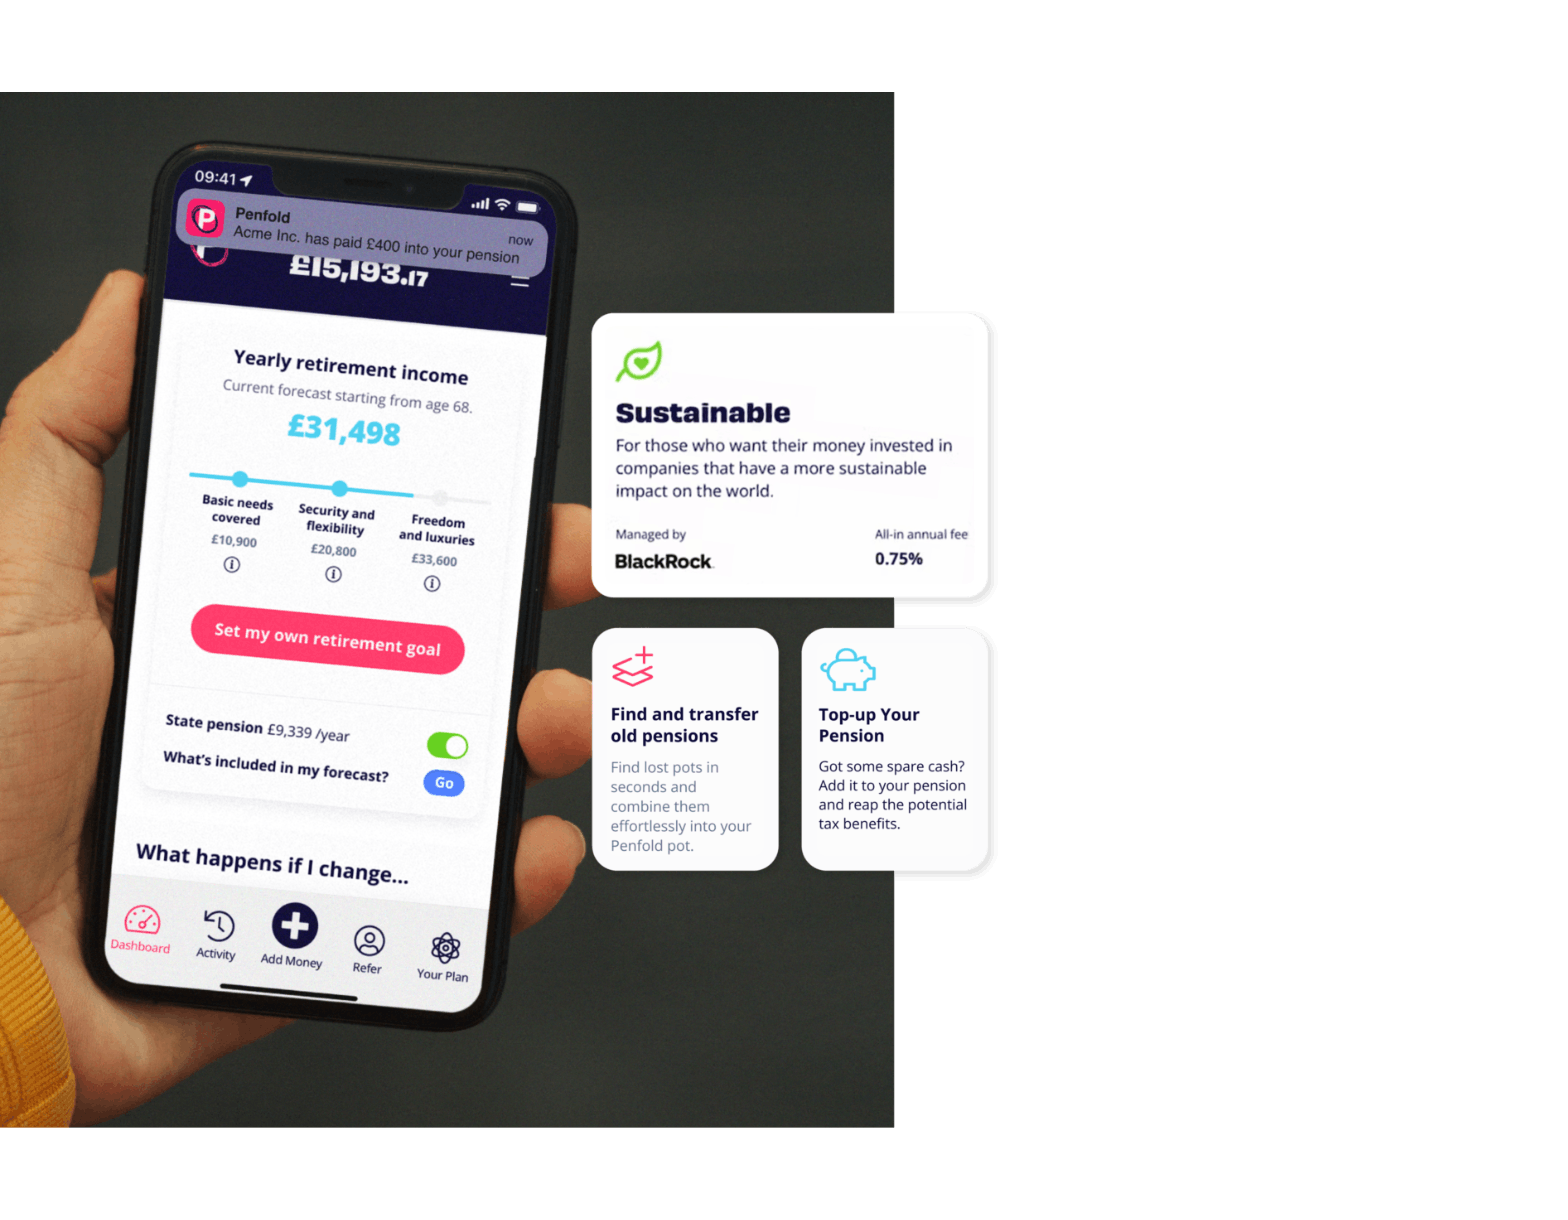 Penfold workplace pension app and sustainable fund